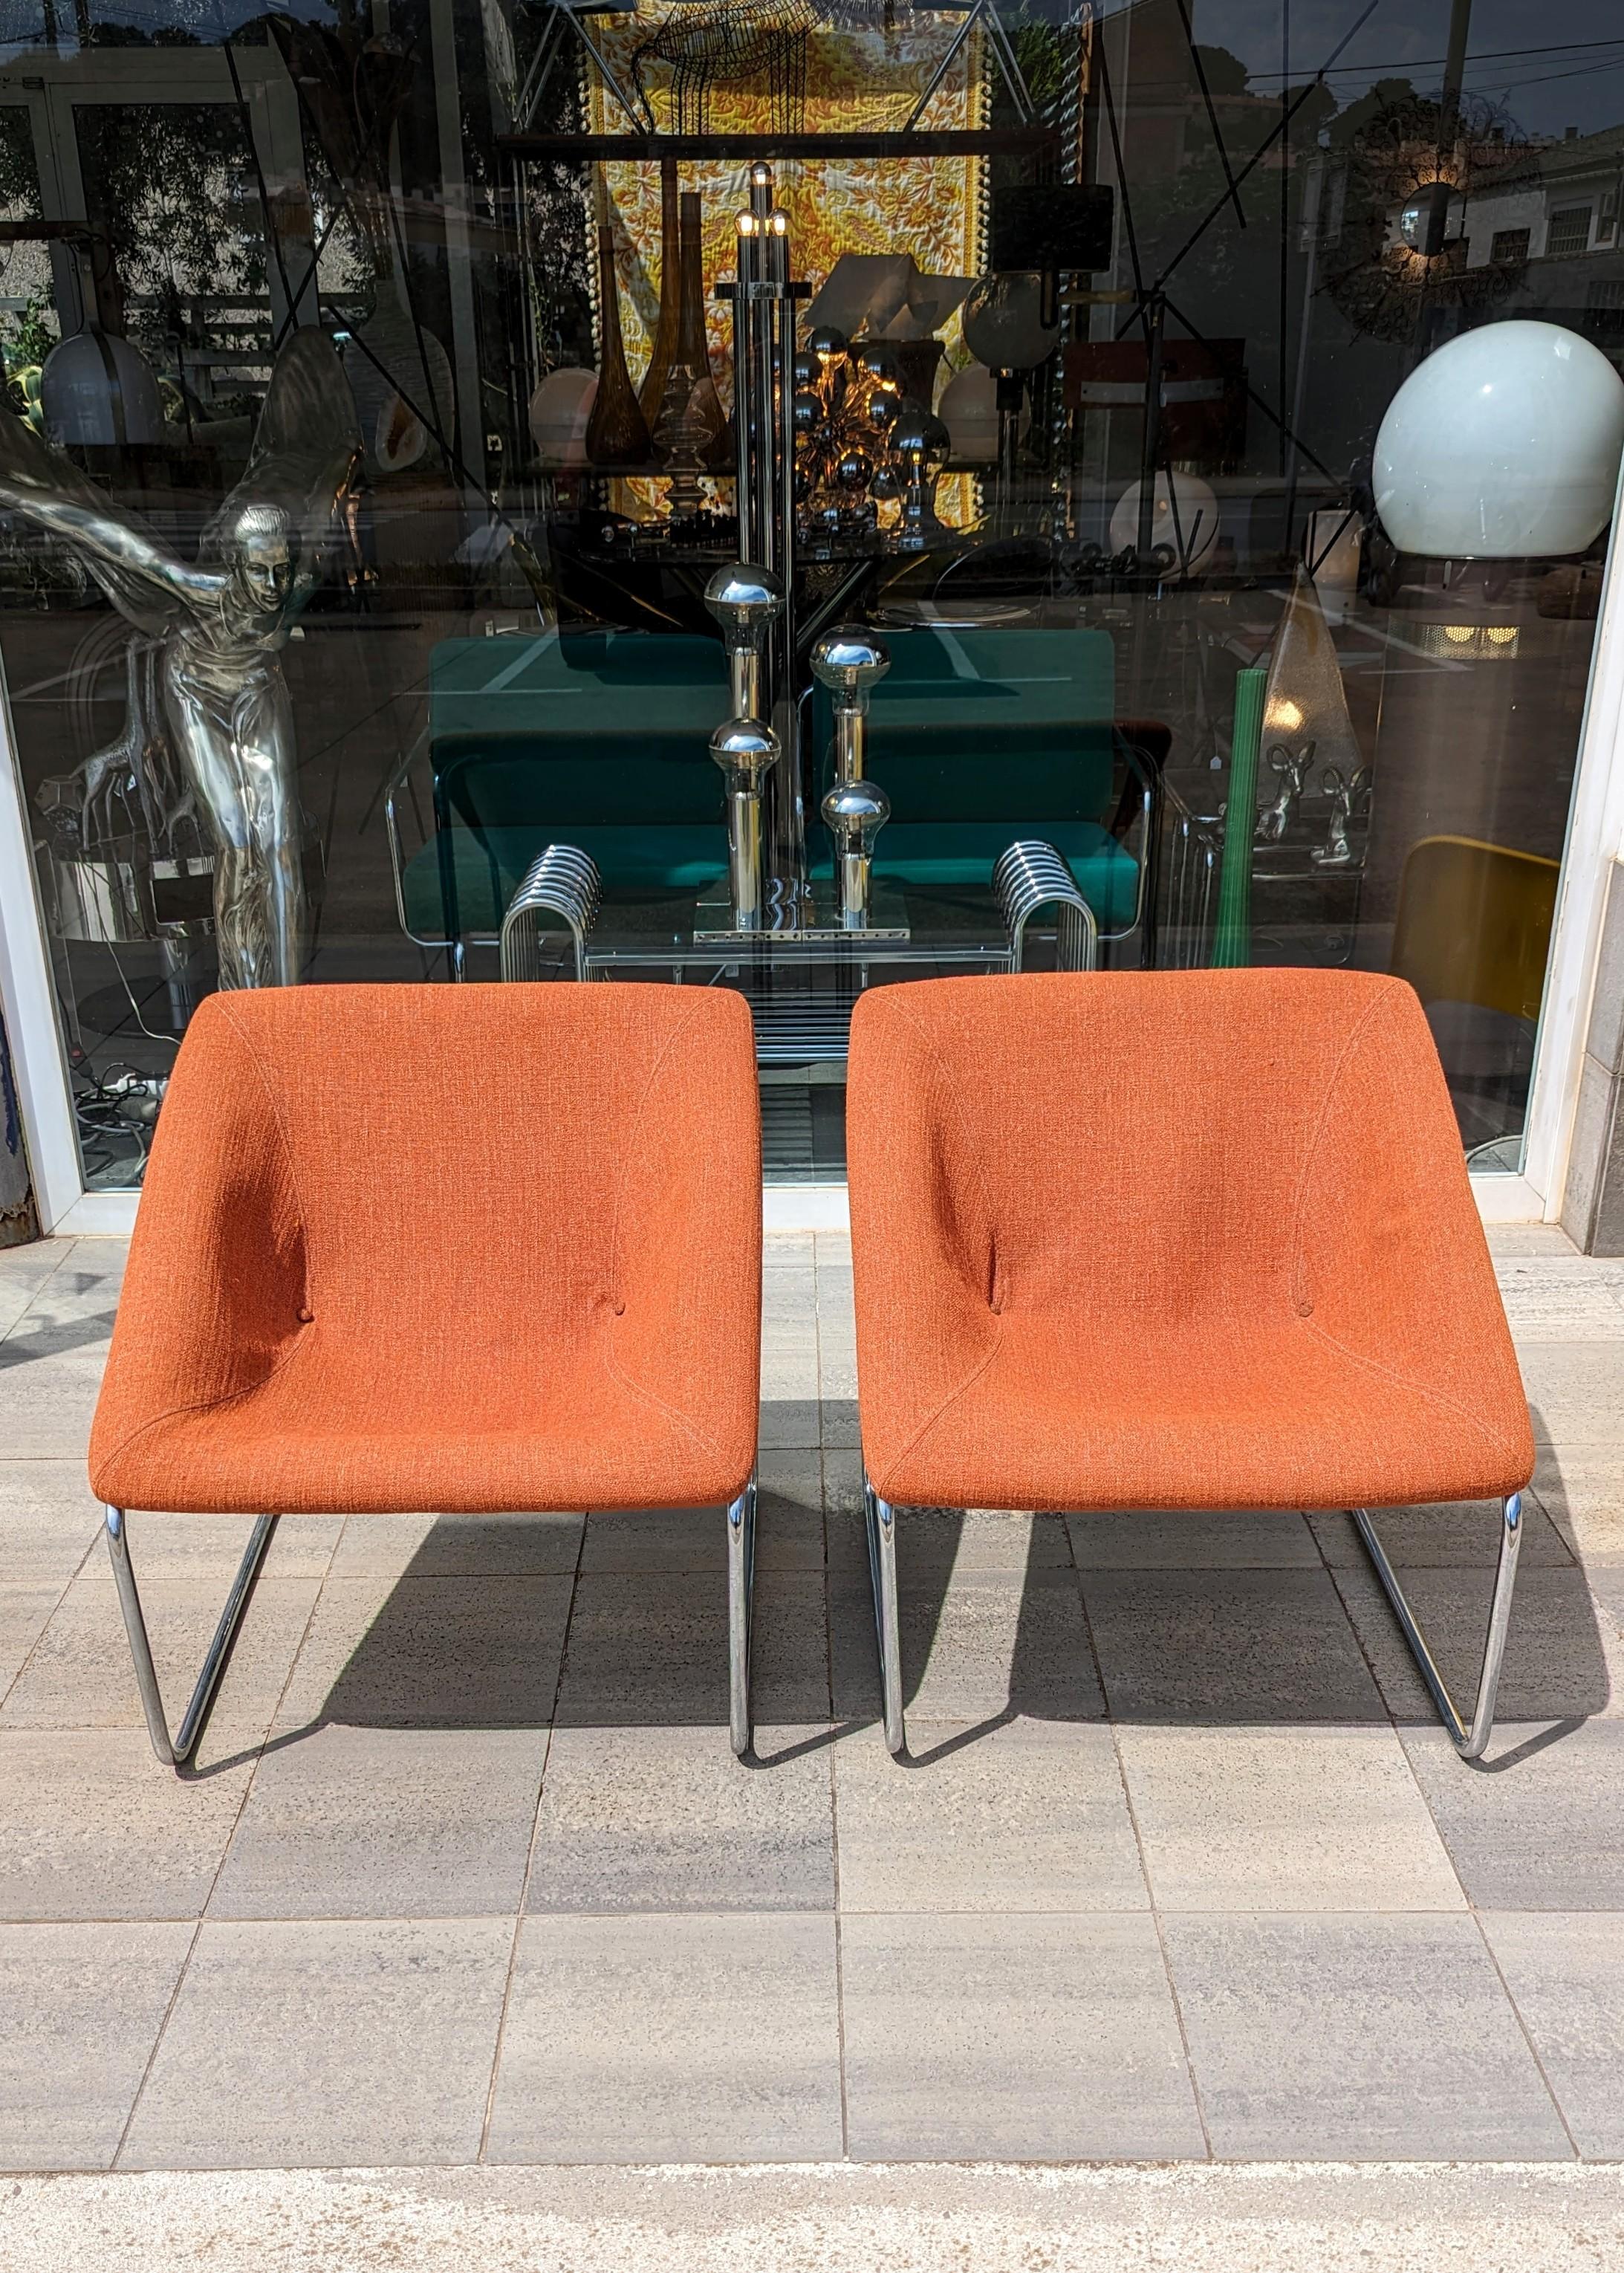 Rare pair of cubic lounge chairs manufactured in 1970s in France.
Very confortable and really practical, very light and handy, taking up little space, they can easily be placed in your interior.